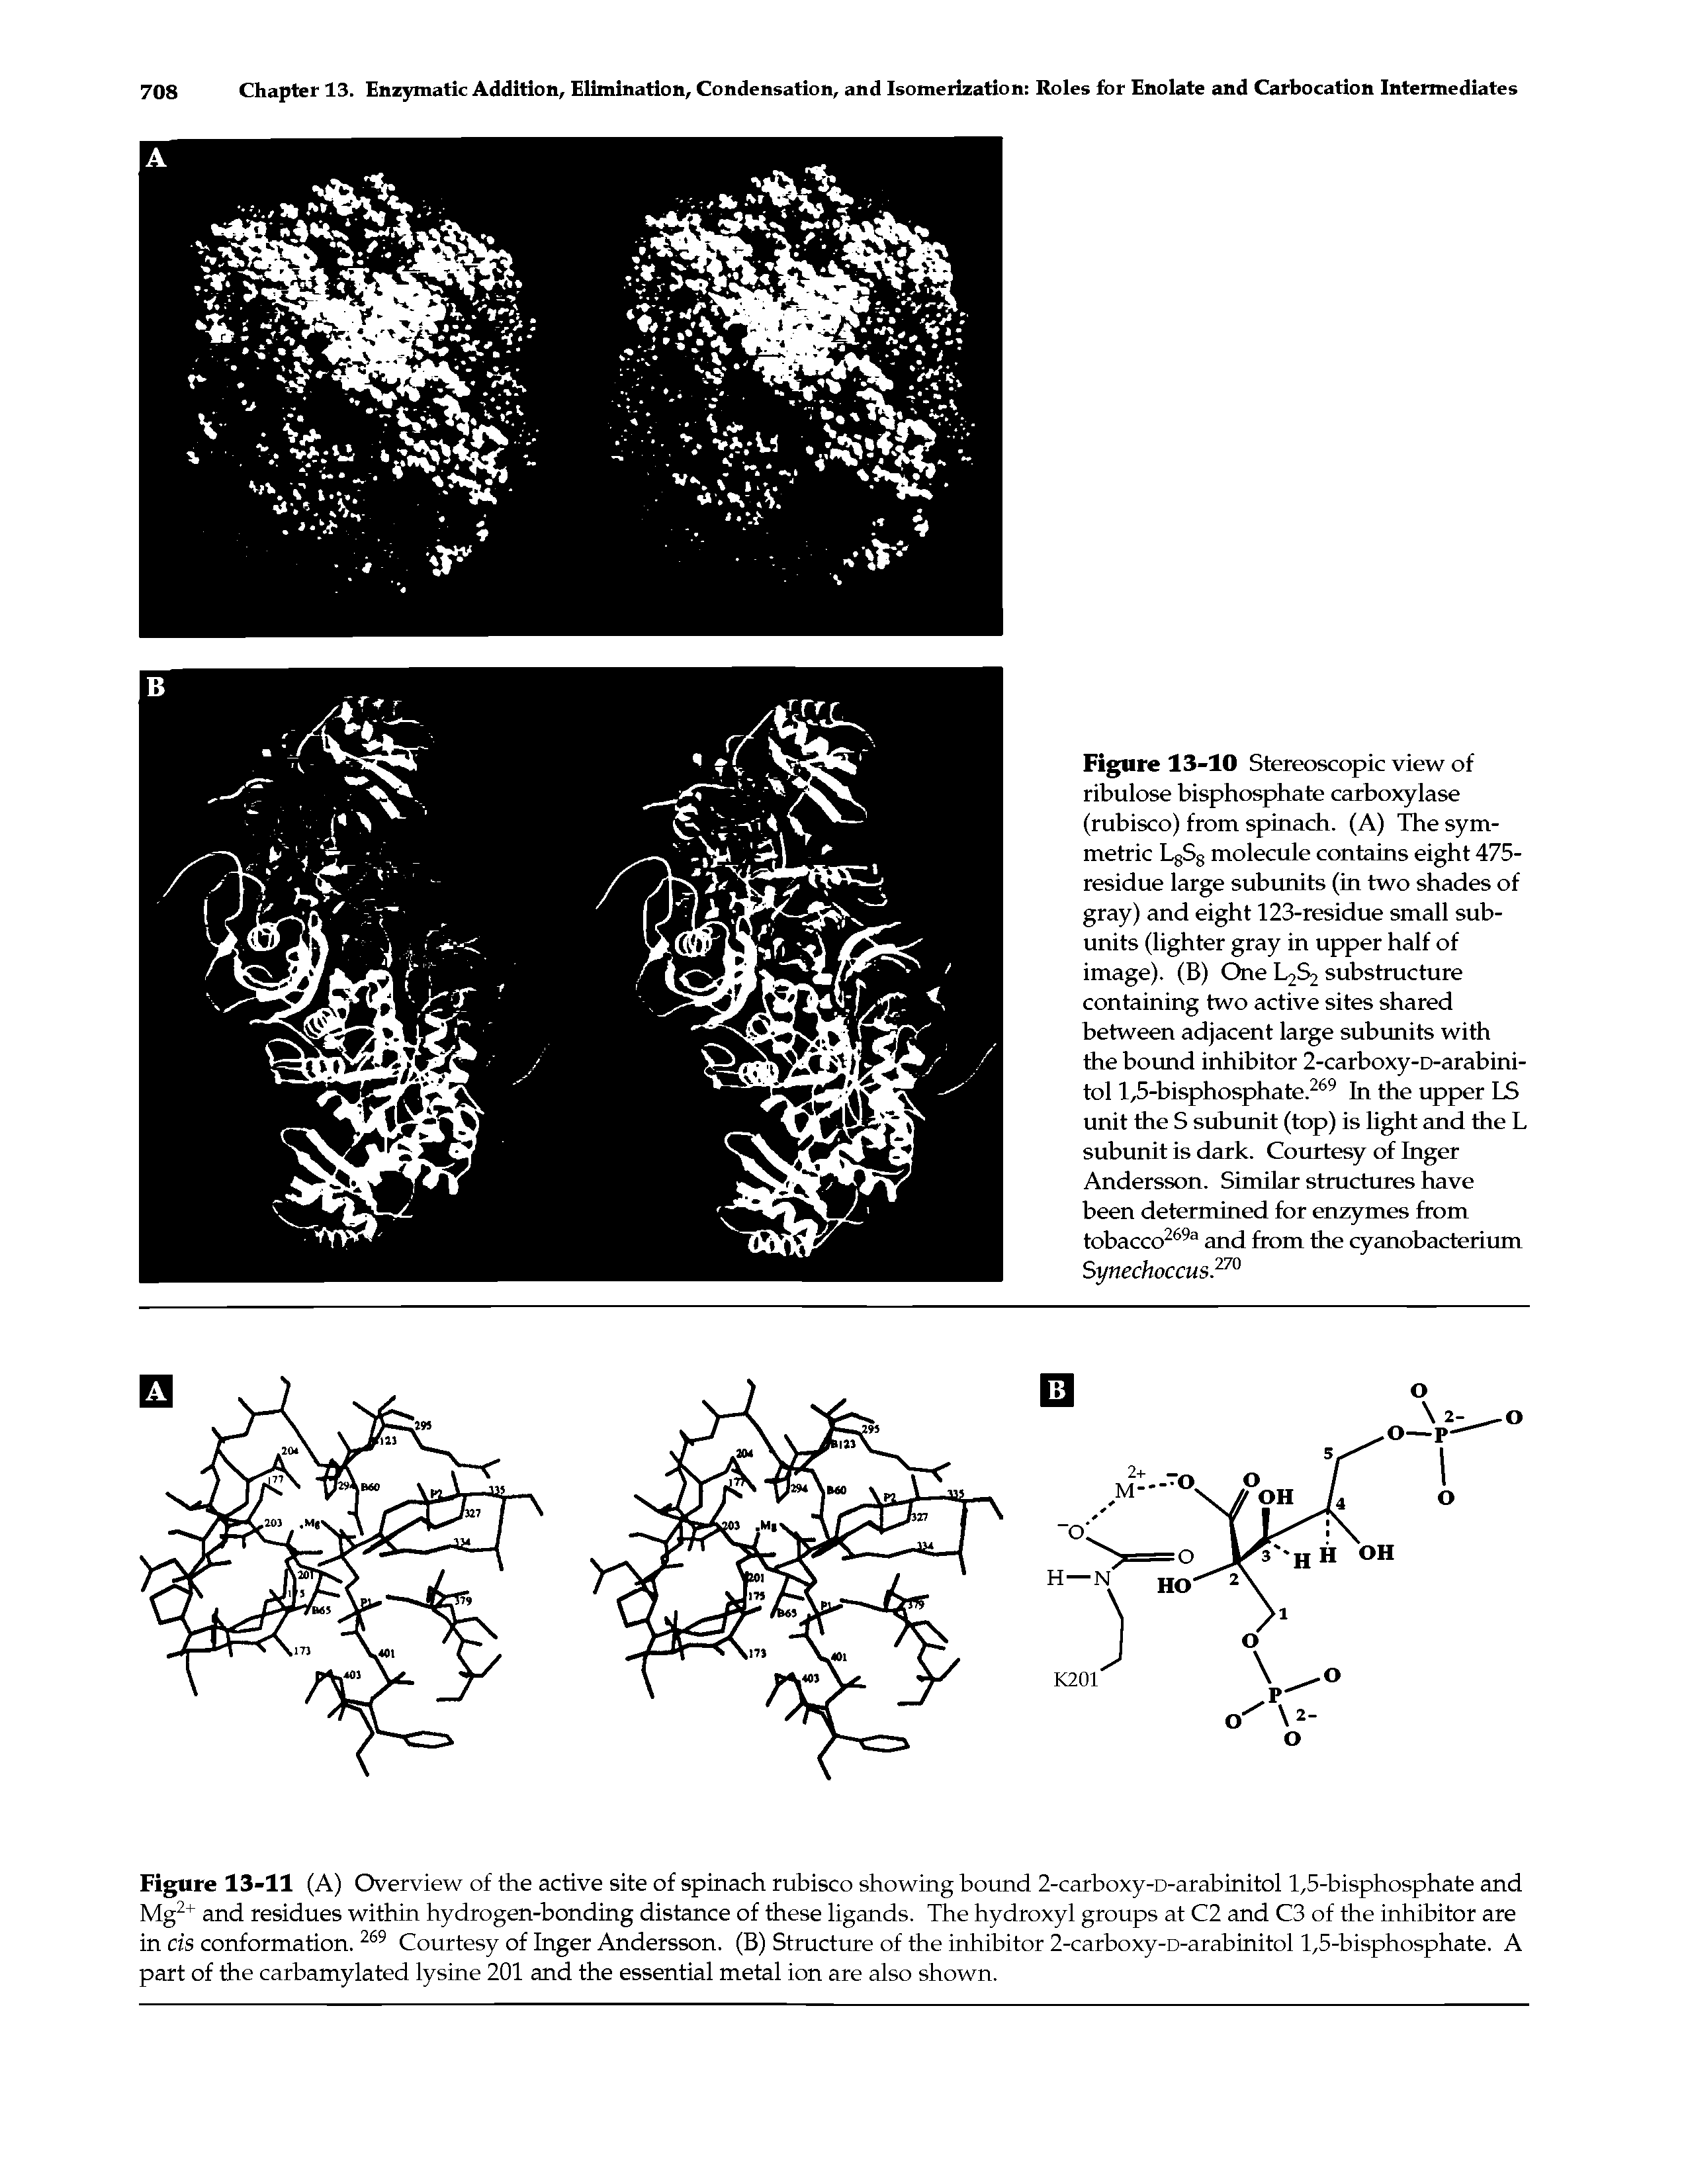 Figure 13-11 (A) Overview of the active site of spinach rubisco showing bound 2-carboxy-D-arabinitol 1,5-bisphosphate and Mg2+ and residues within hydrogen-bonding distance of these ligands. The hydroxyl groups at C2 and C3 of the inhibitor are in cis conformation. 269 Courtesy of Inger Andersson. (B) Structure of the inhibitor 2-carboxy-D-arabinitol 1,5-bisphosphate. A part of the carbamylated lysine 201 and the essential metal ion are also shown.